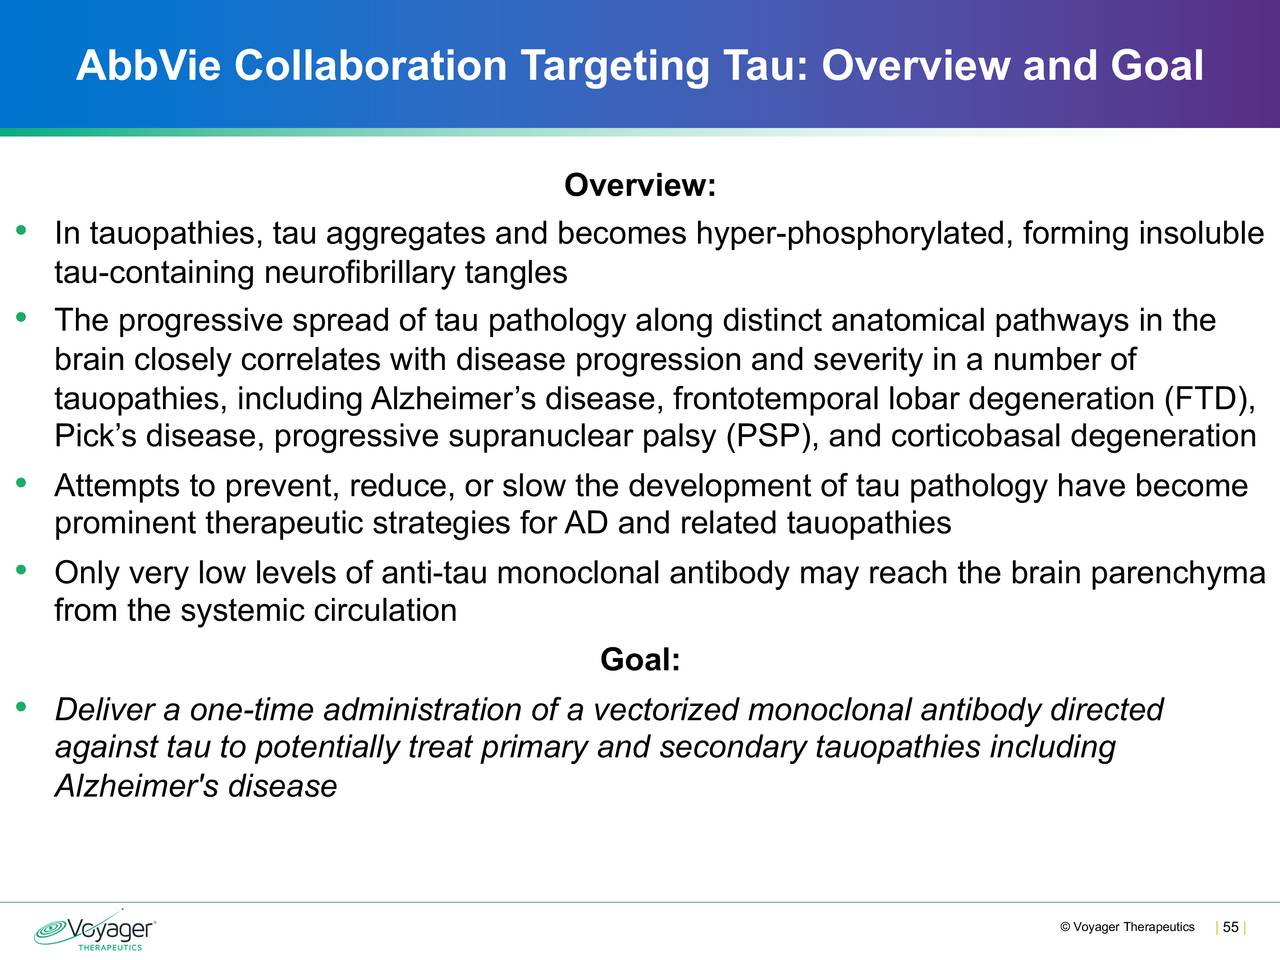 AbbVie Collaboration Targeting Tau: Overview and Goal